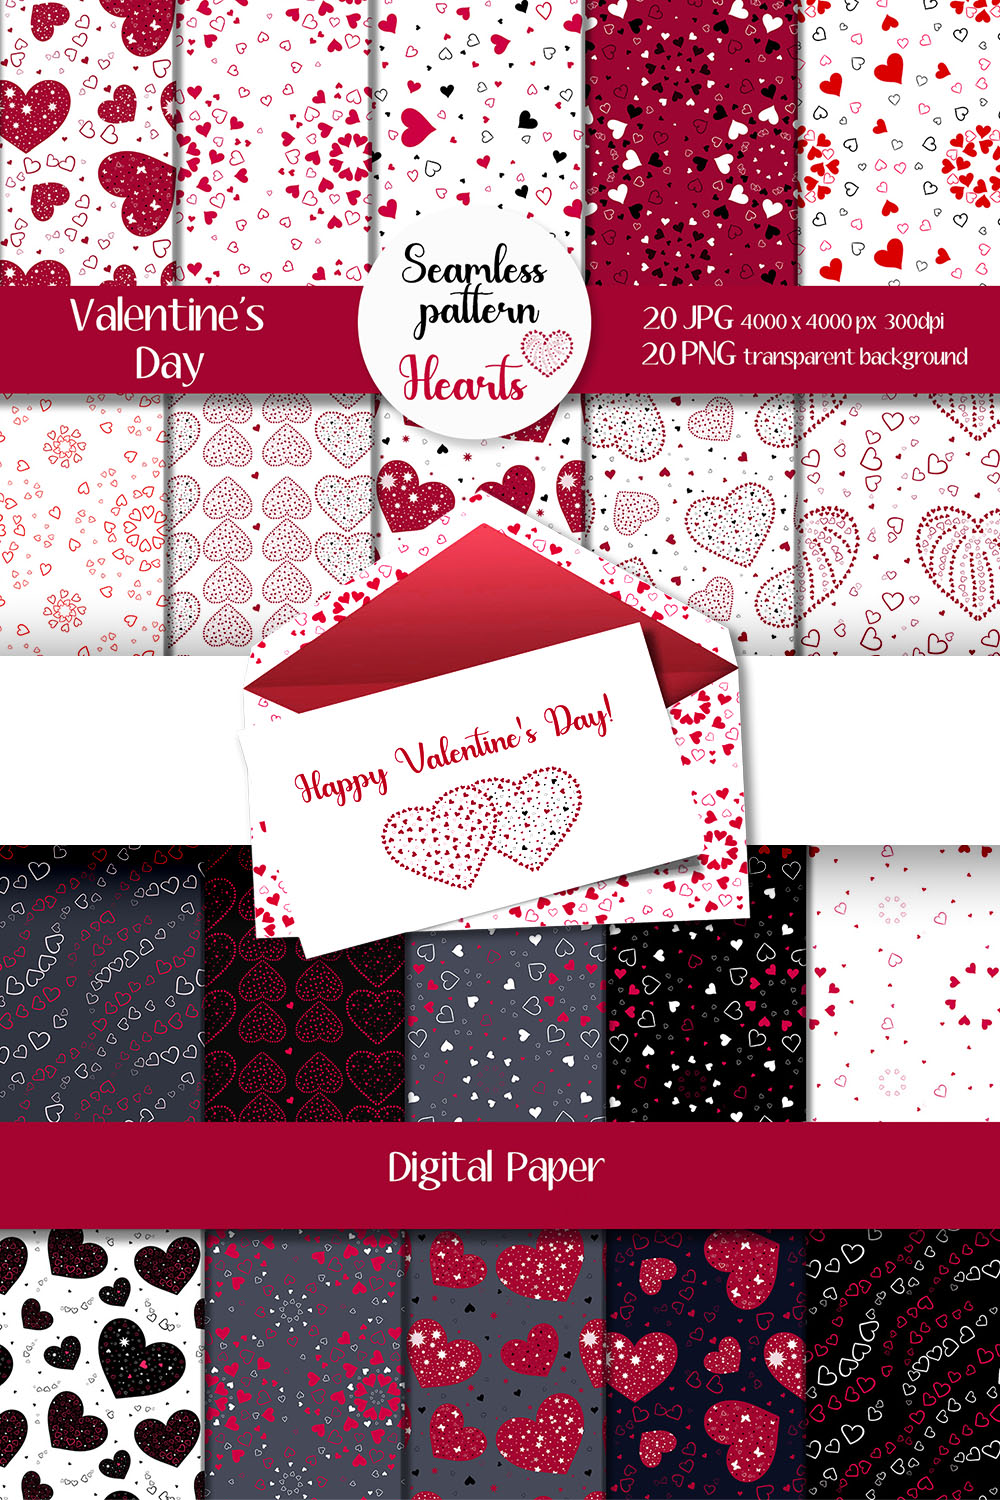 Red Hearts Valentines Day Seamless Template pinterest image.